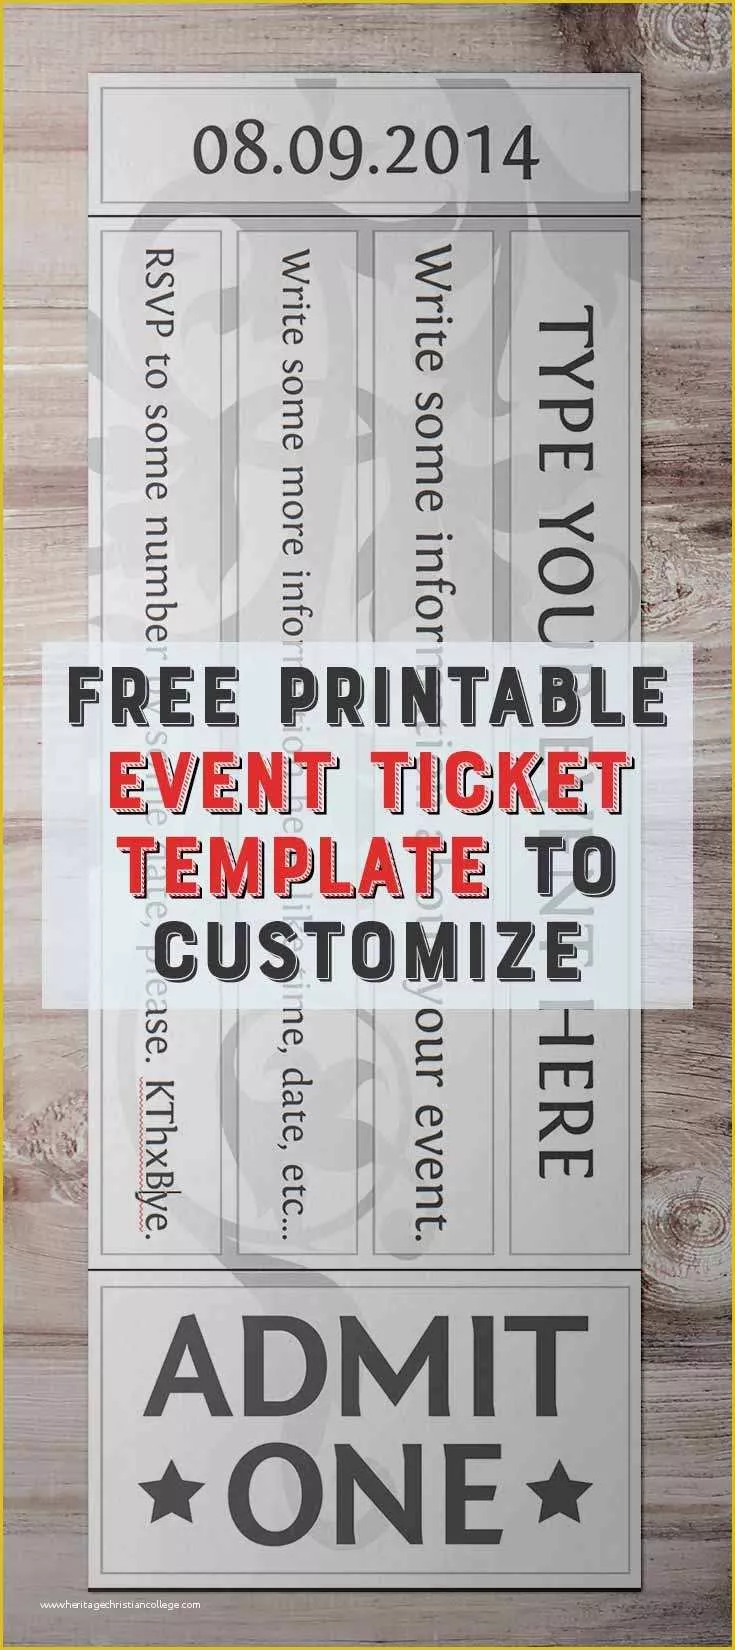 Free Printable Ticket Template Of Free Printable event Ticket Template to Customize